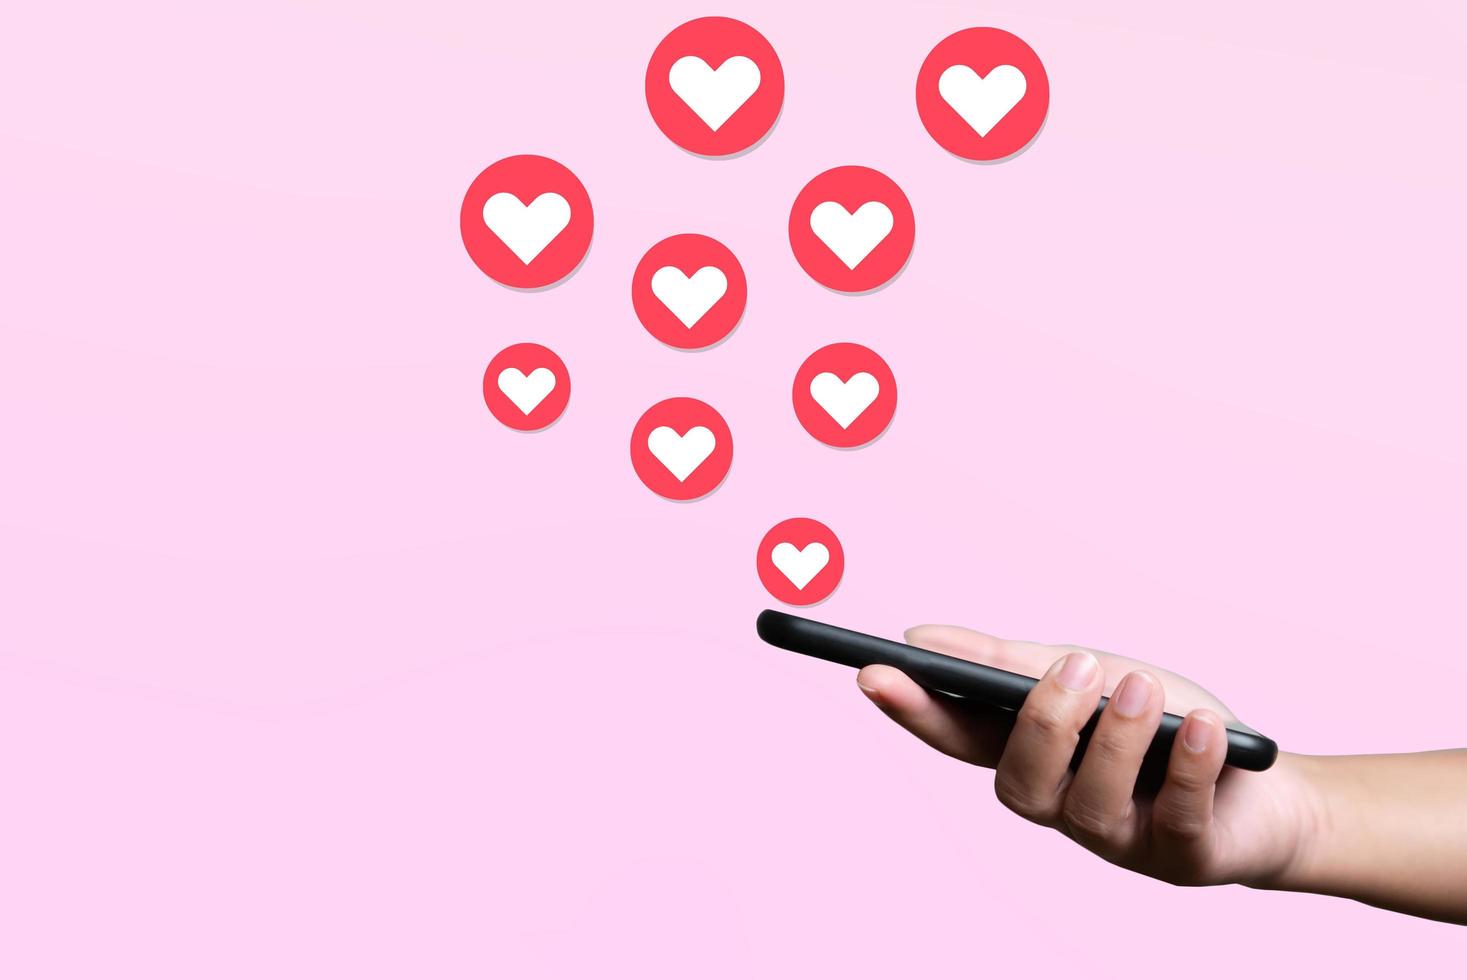 People use mobile phone sending hearts. Love and connection concept using telephone application on pink background. photo